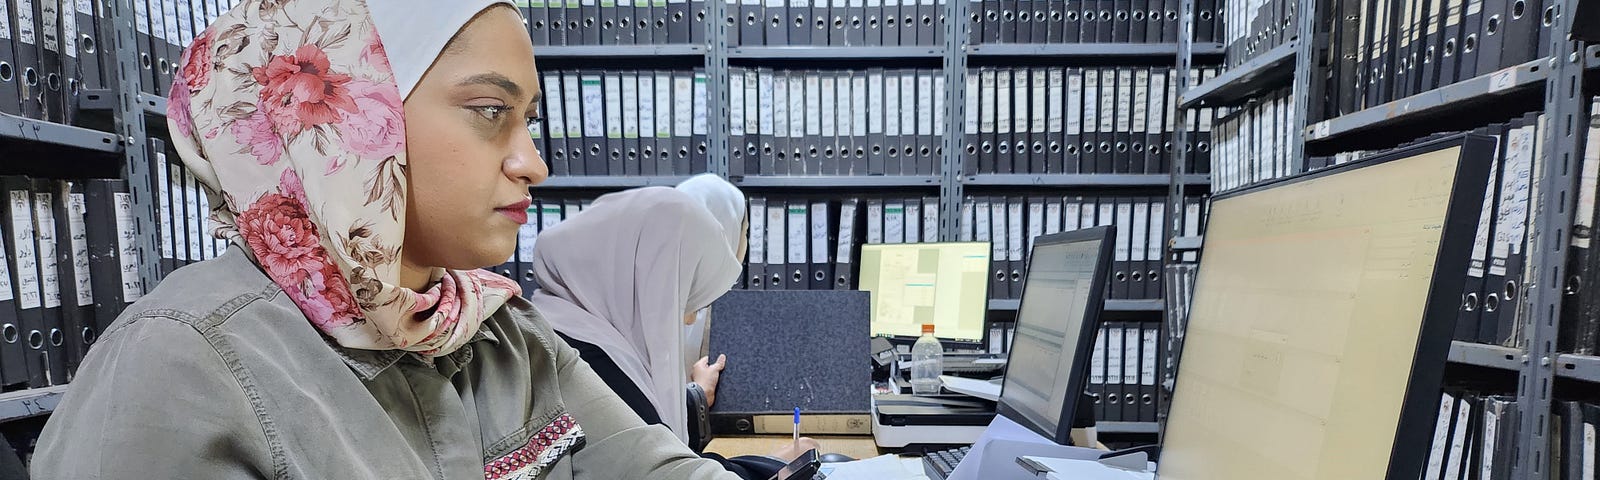 A woman types on a keyboard in front of a computer monitor inside an office with a few hundred matching black binders with white labels lined on shelving that nearly reaches to the ceiling.